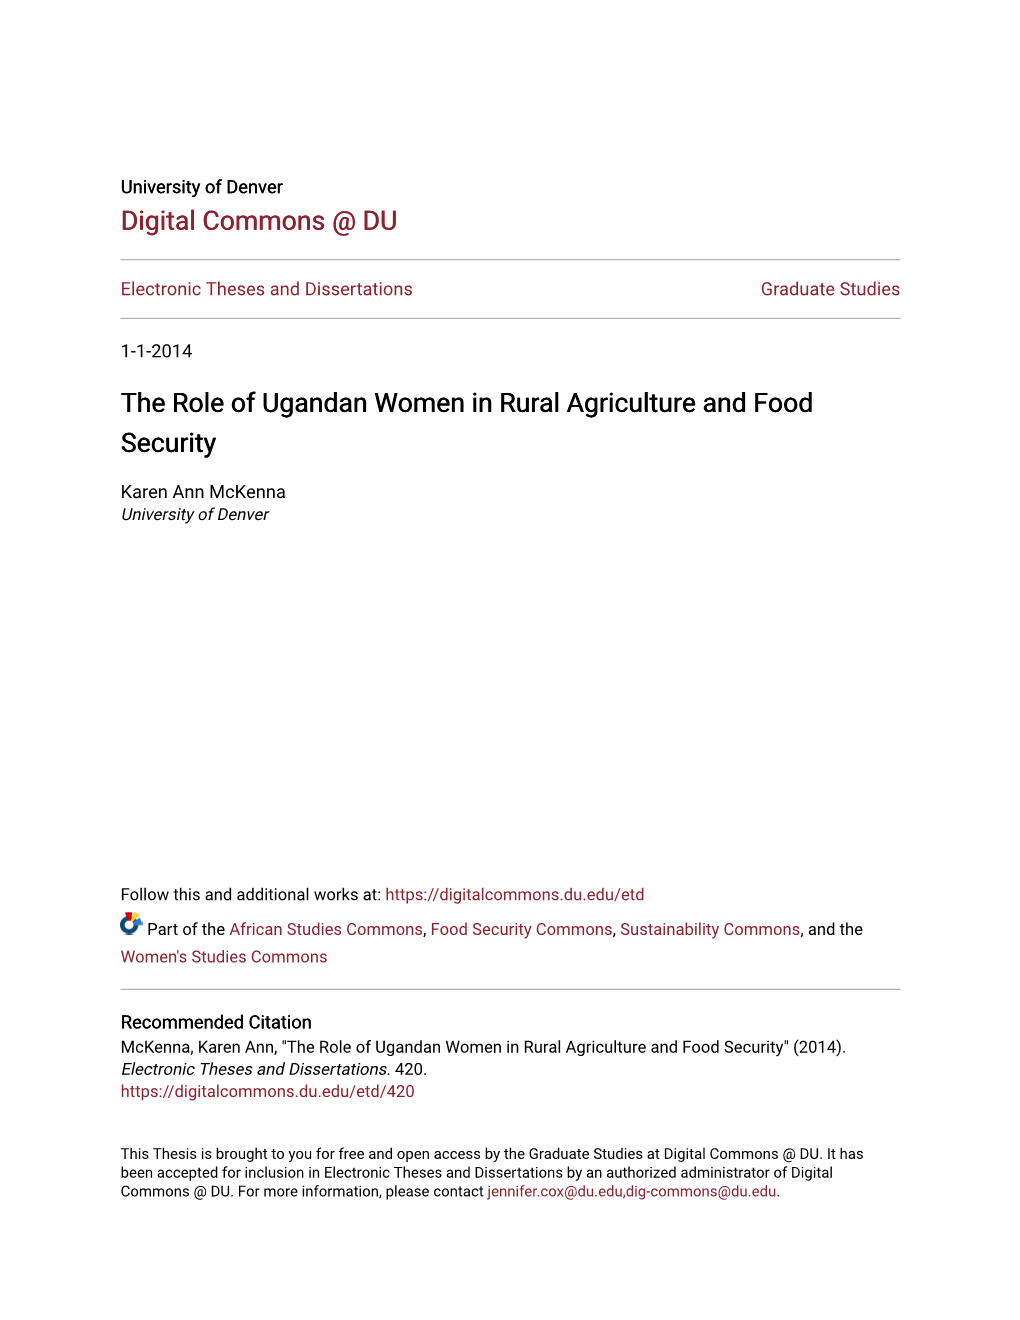 The Role of Ugandan Women in Rural Agriculture and Food Security